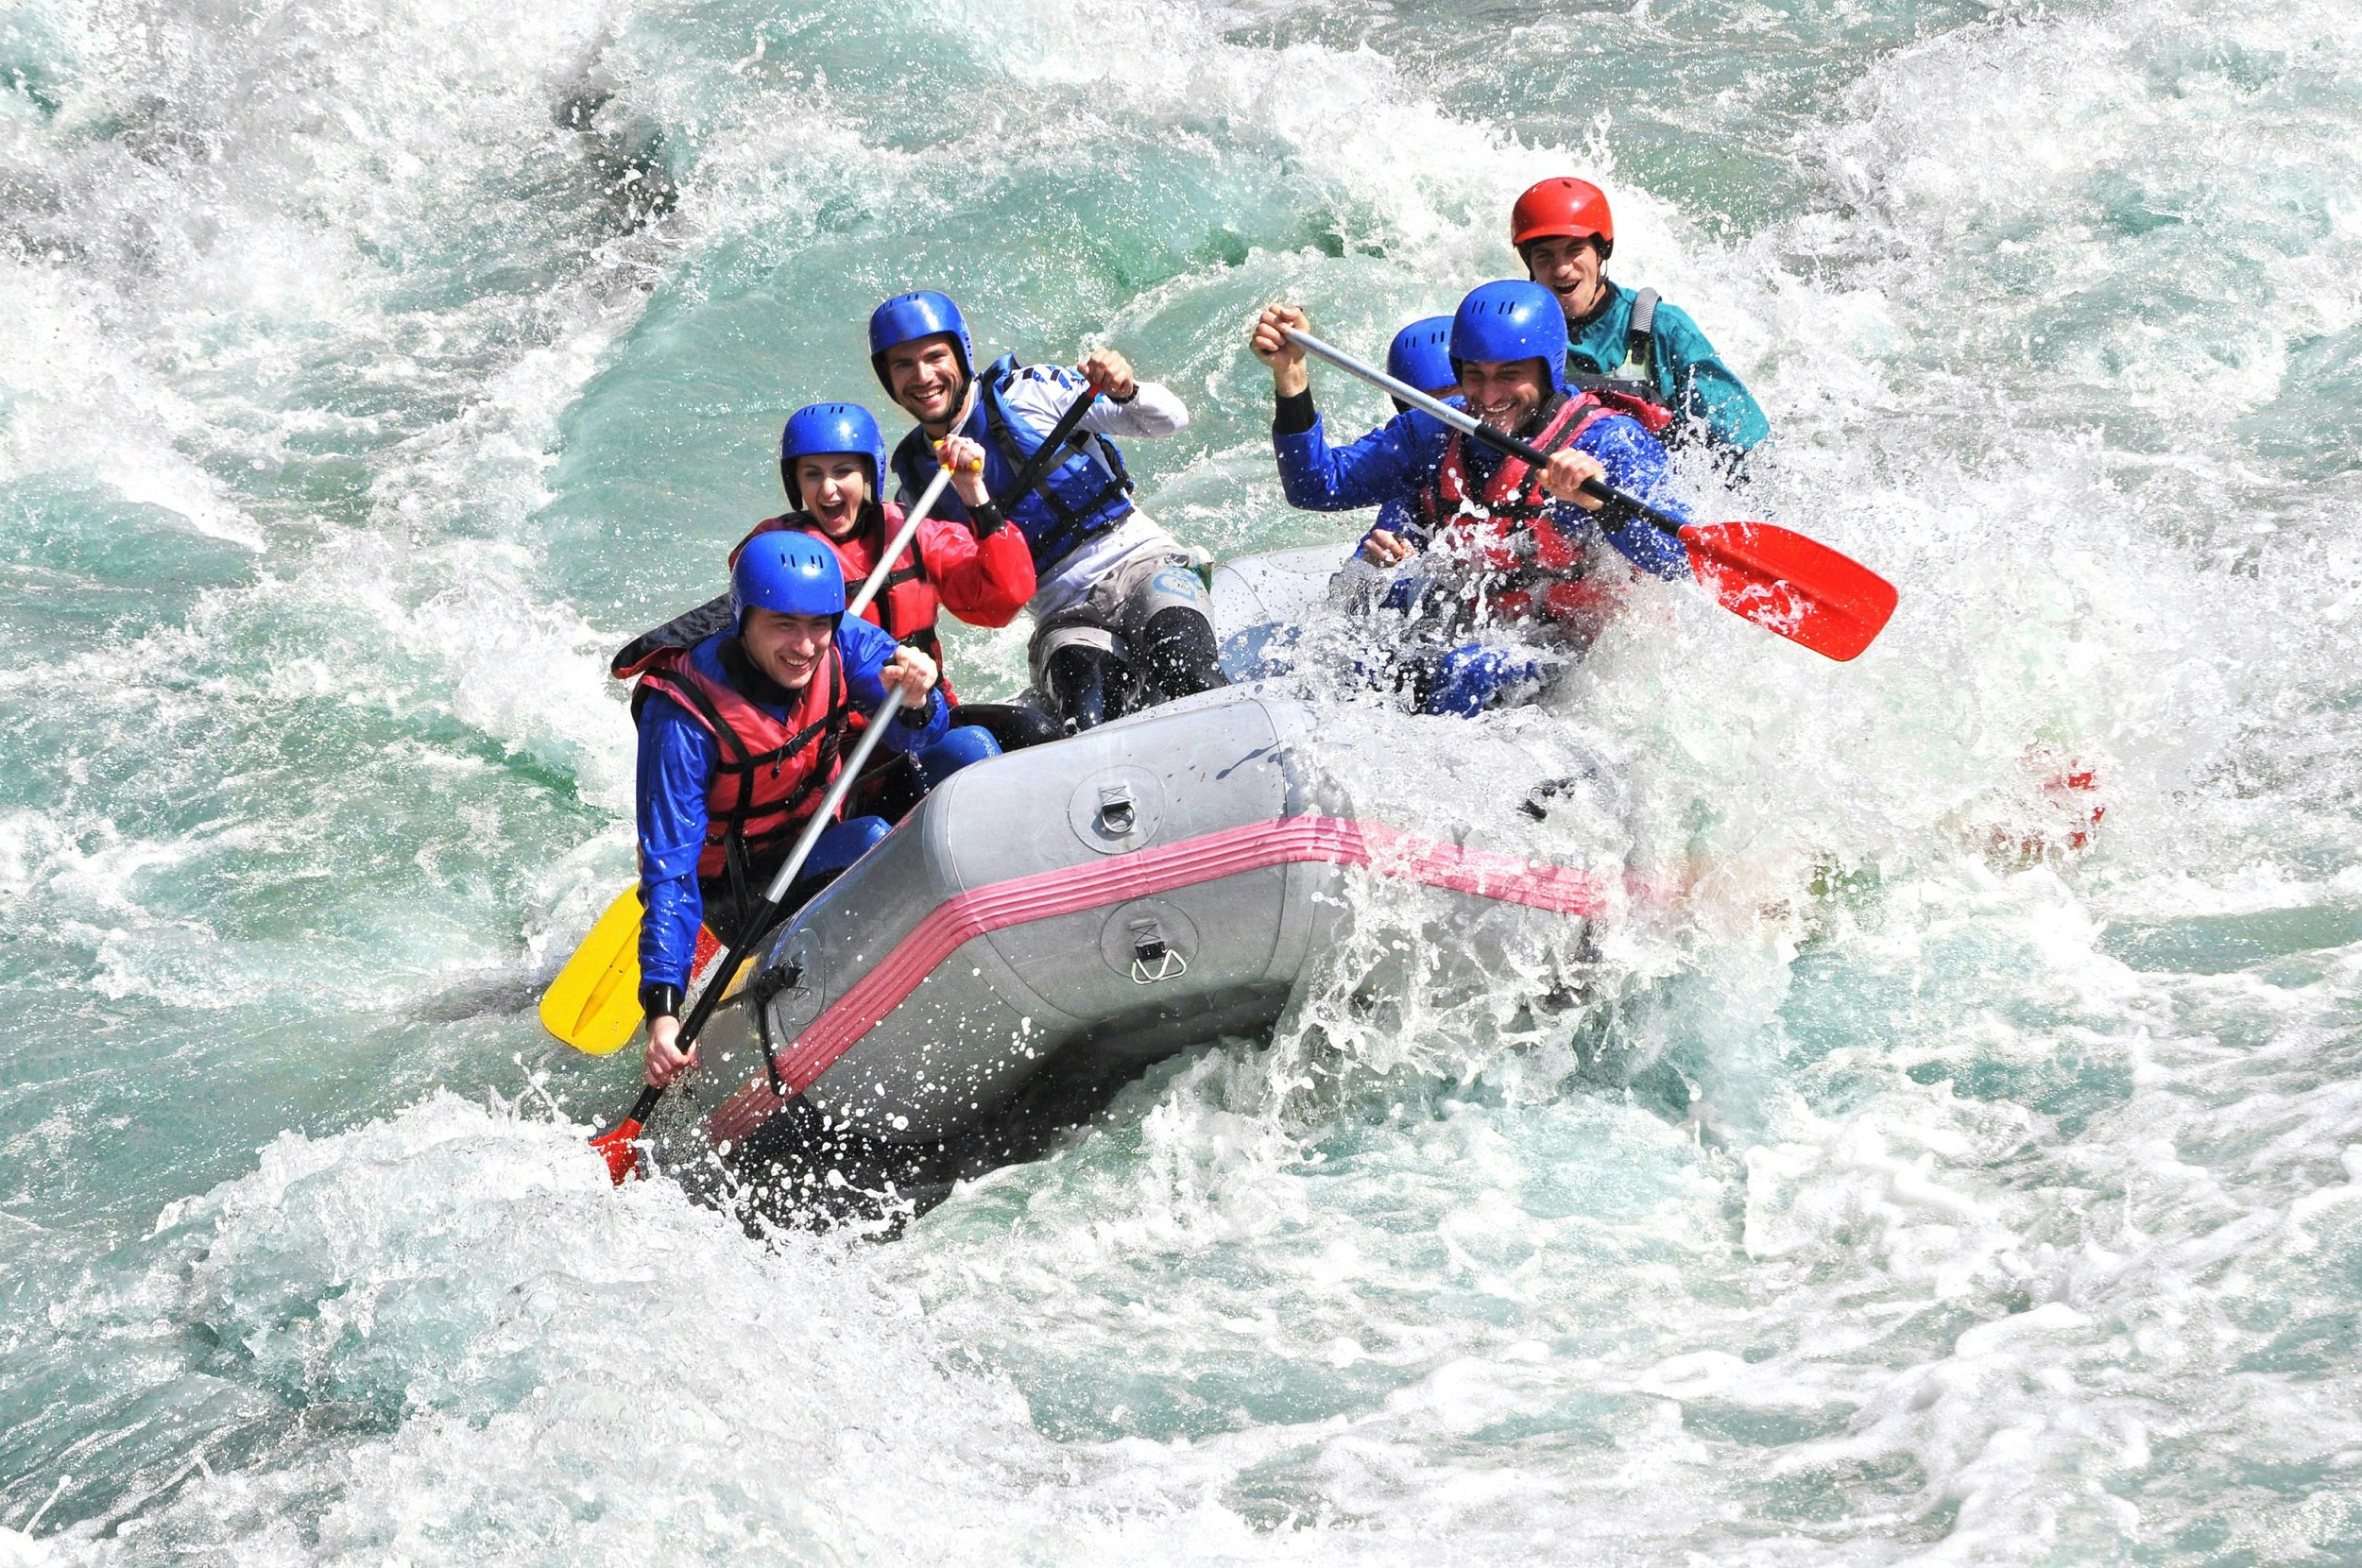 An inflatable raft with six smiling people in it crashes through whitewater; all are wearing blue helmets and red life jackets.